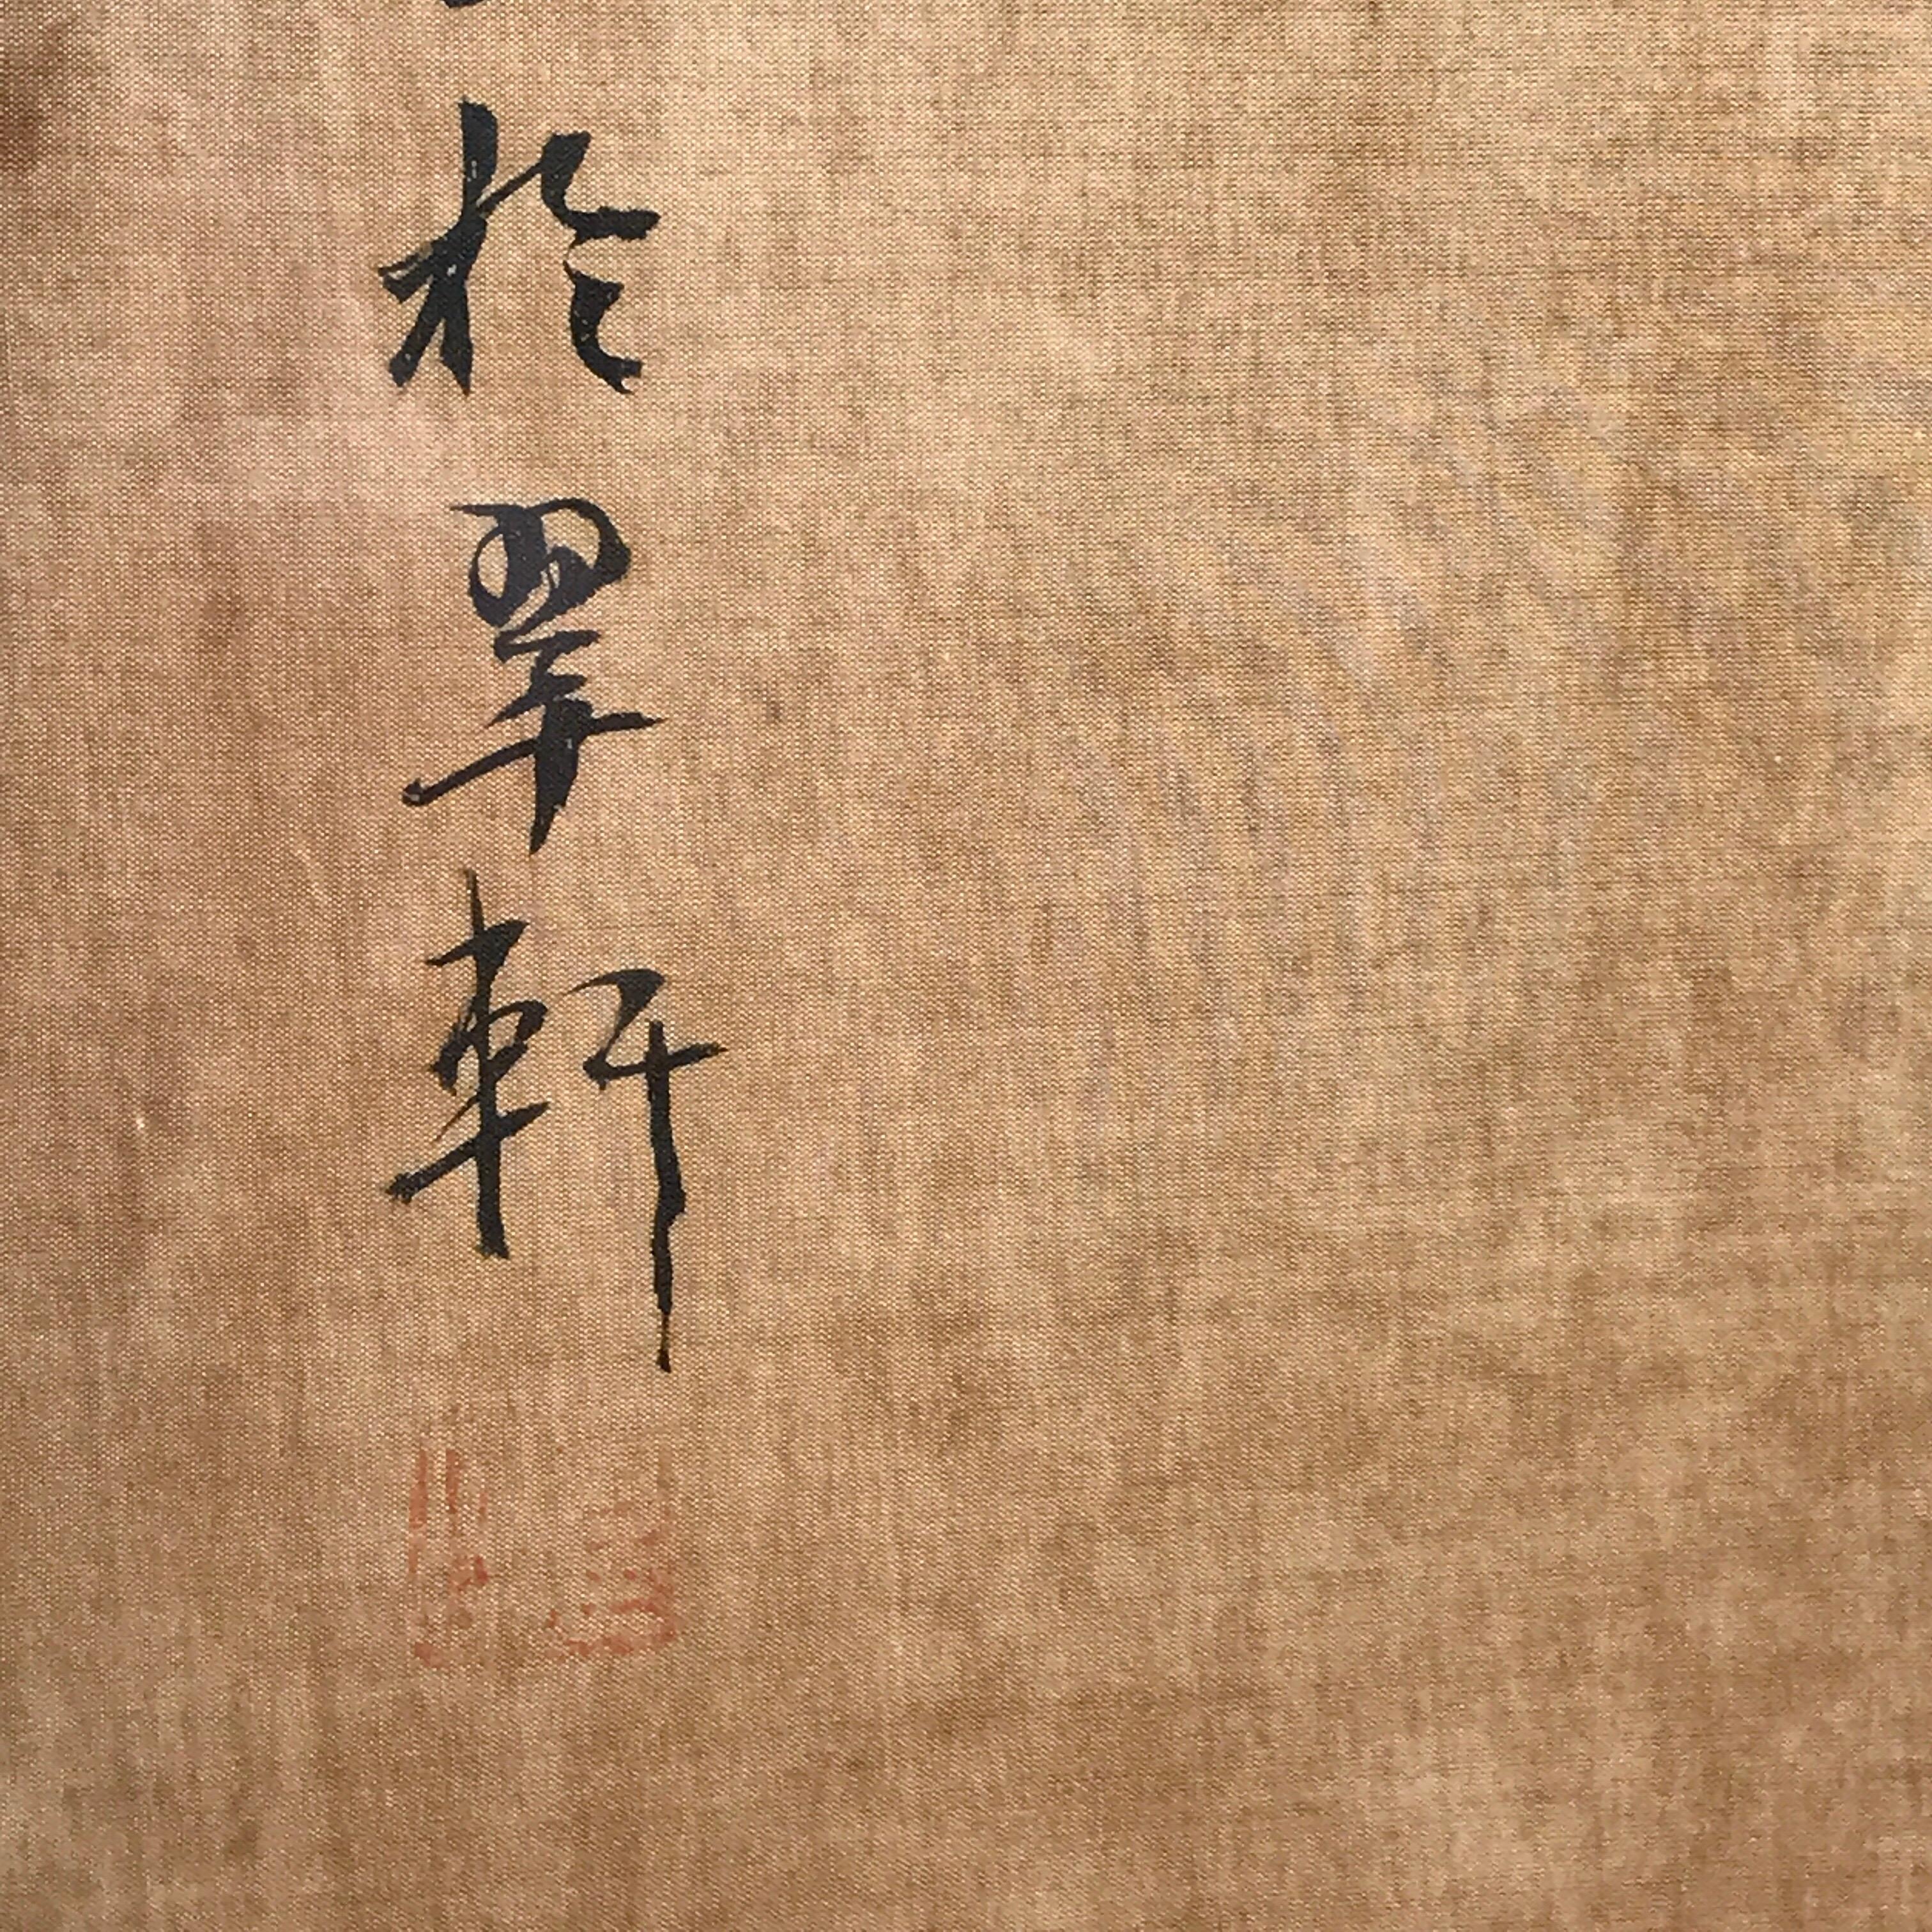 Hand-Painted Chinese School Scroll Painting